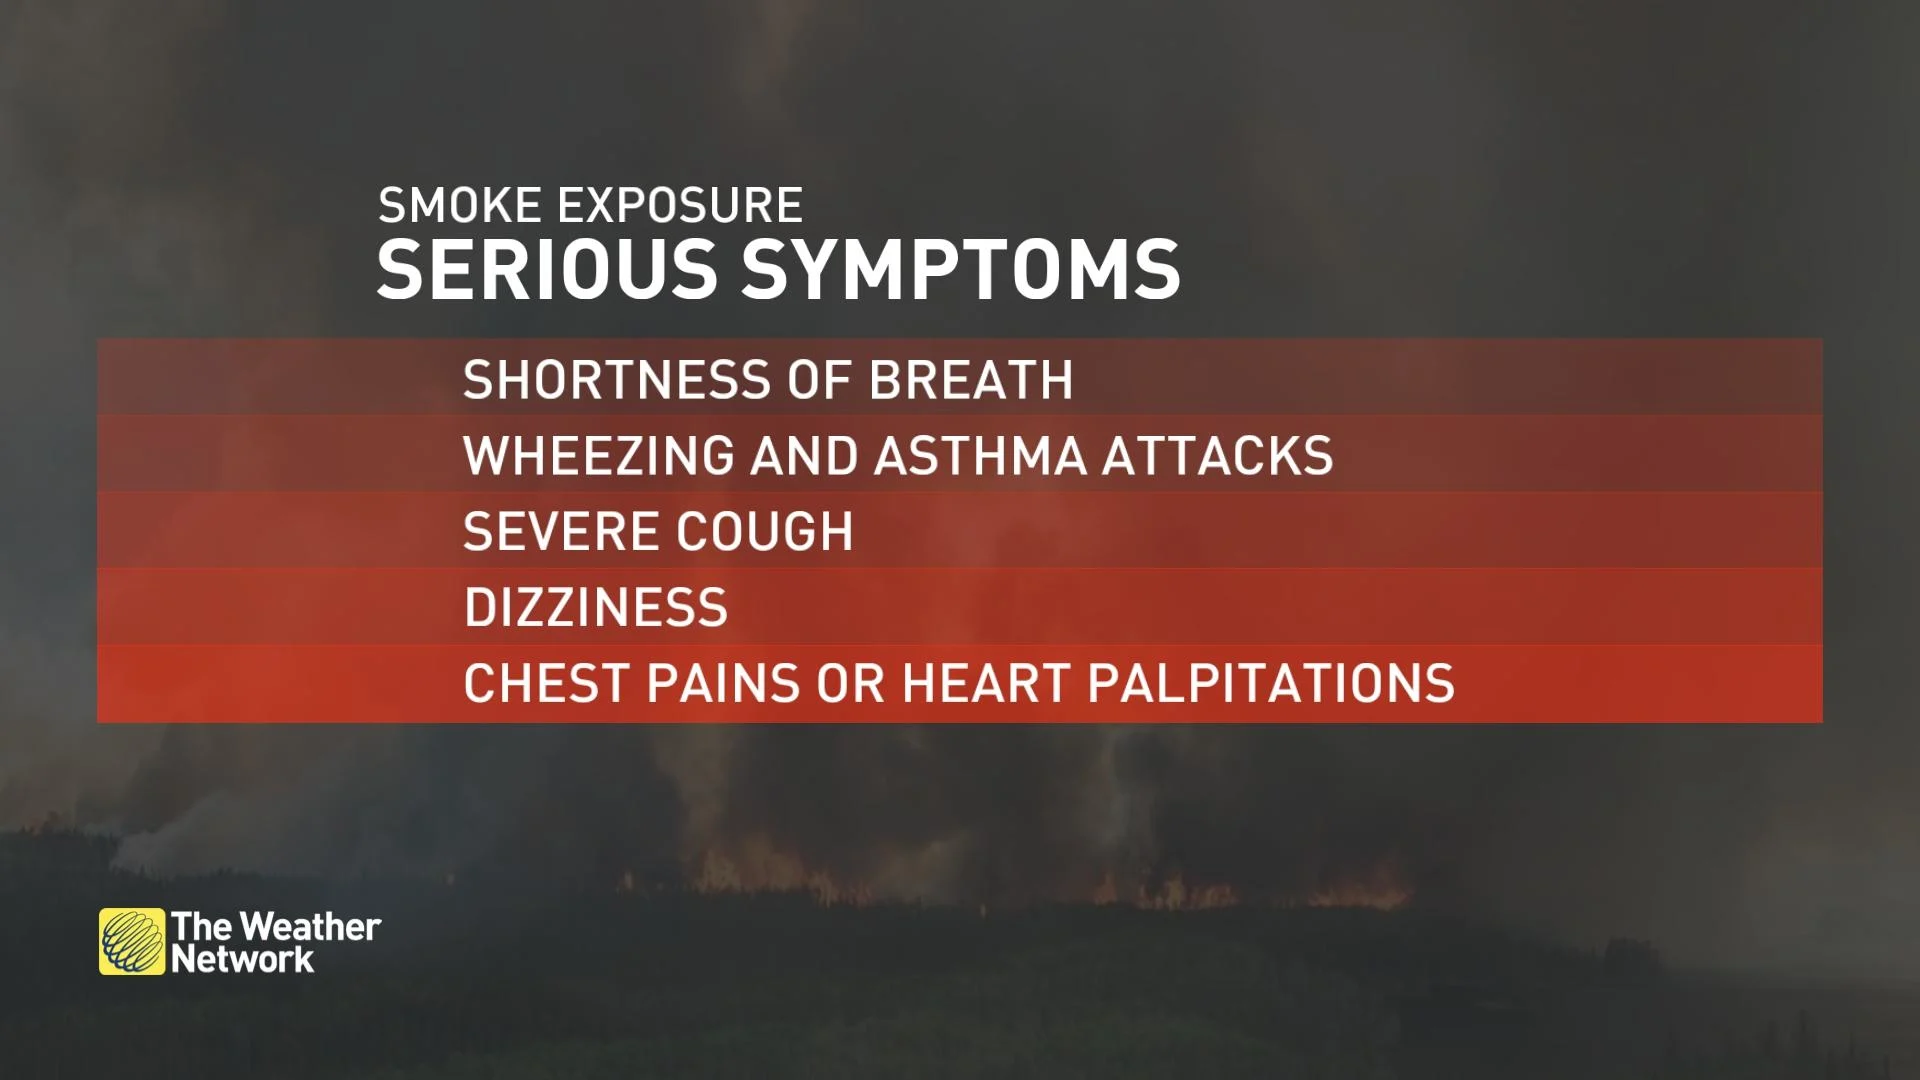 Explainer: Wildfire smoke serious health impacts. Less common symptoms, but are more serious. Poor air quality. Baron (Government of Canada)